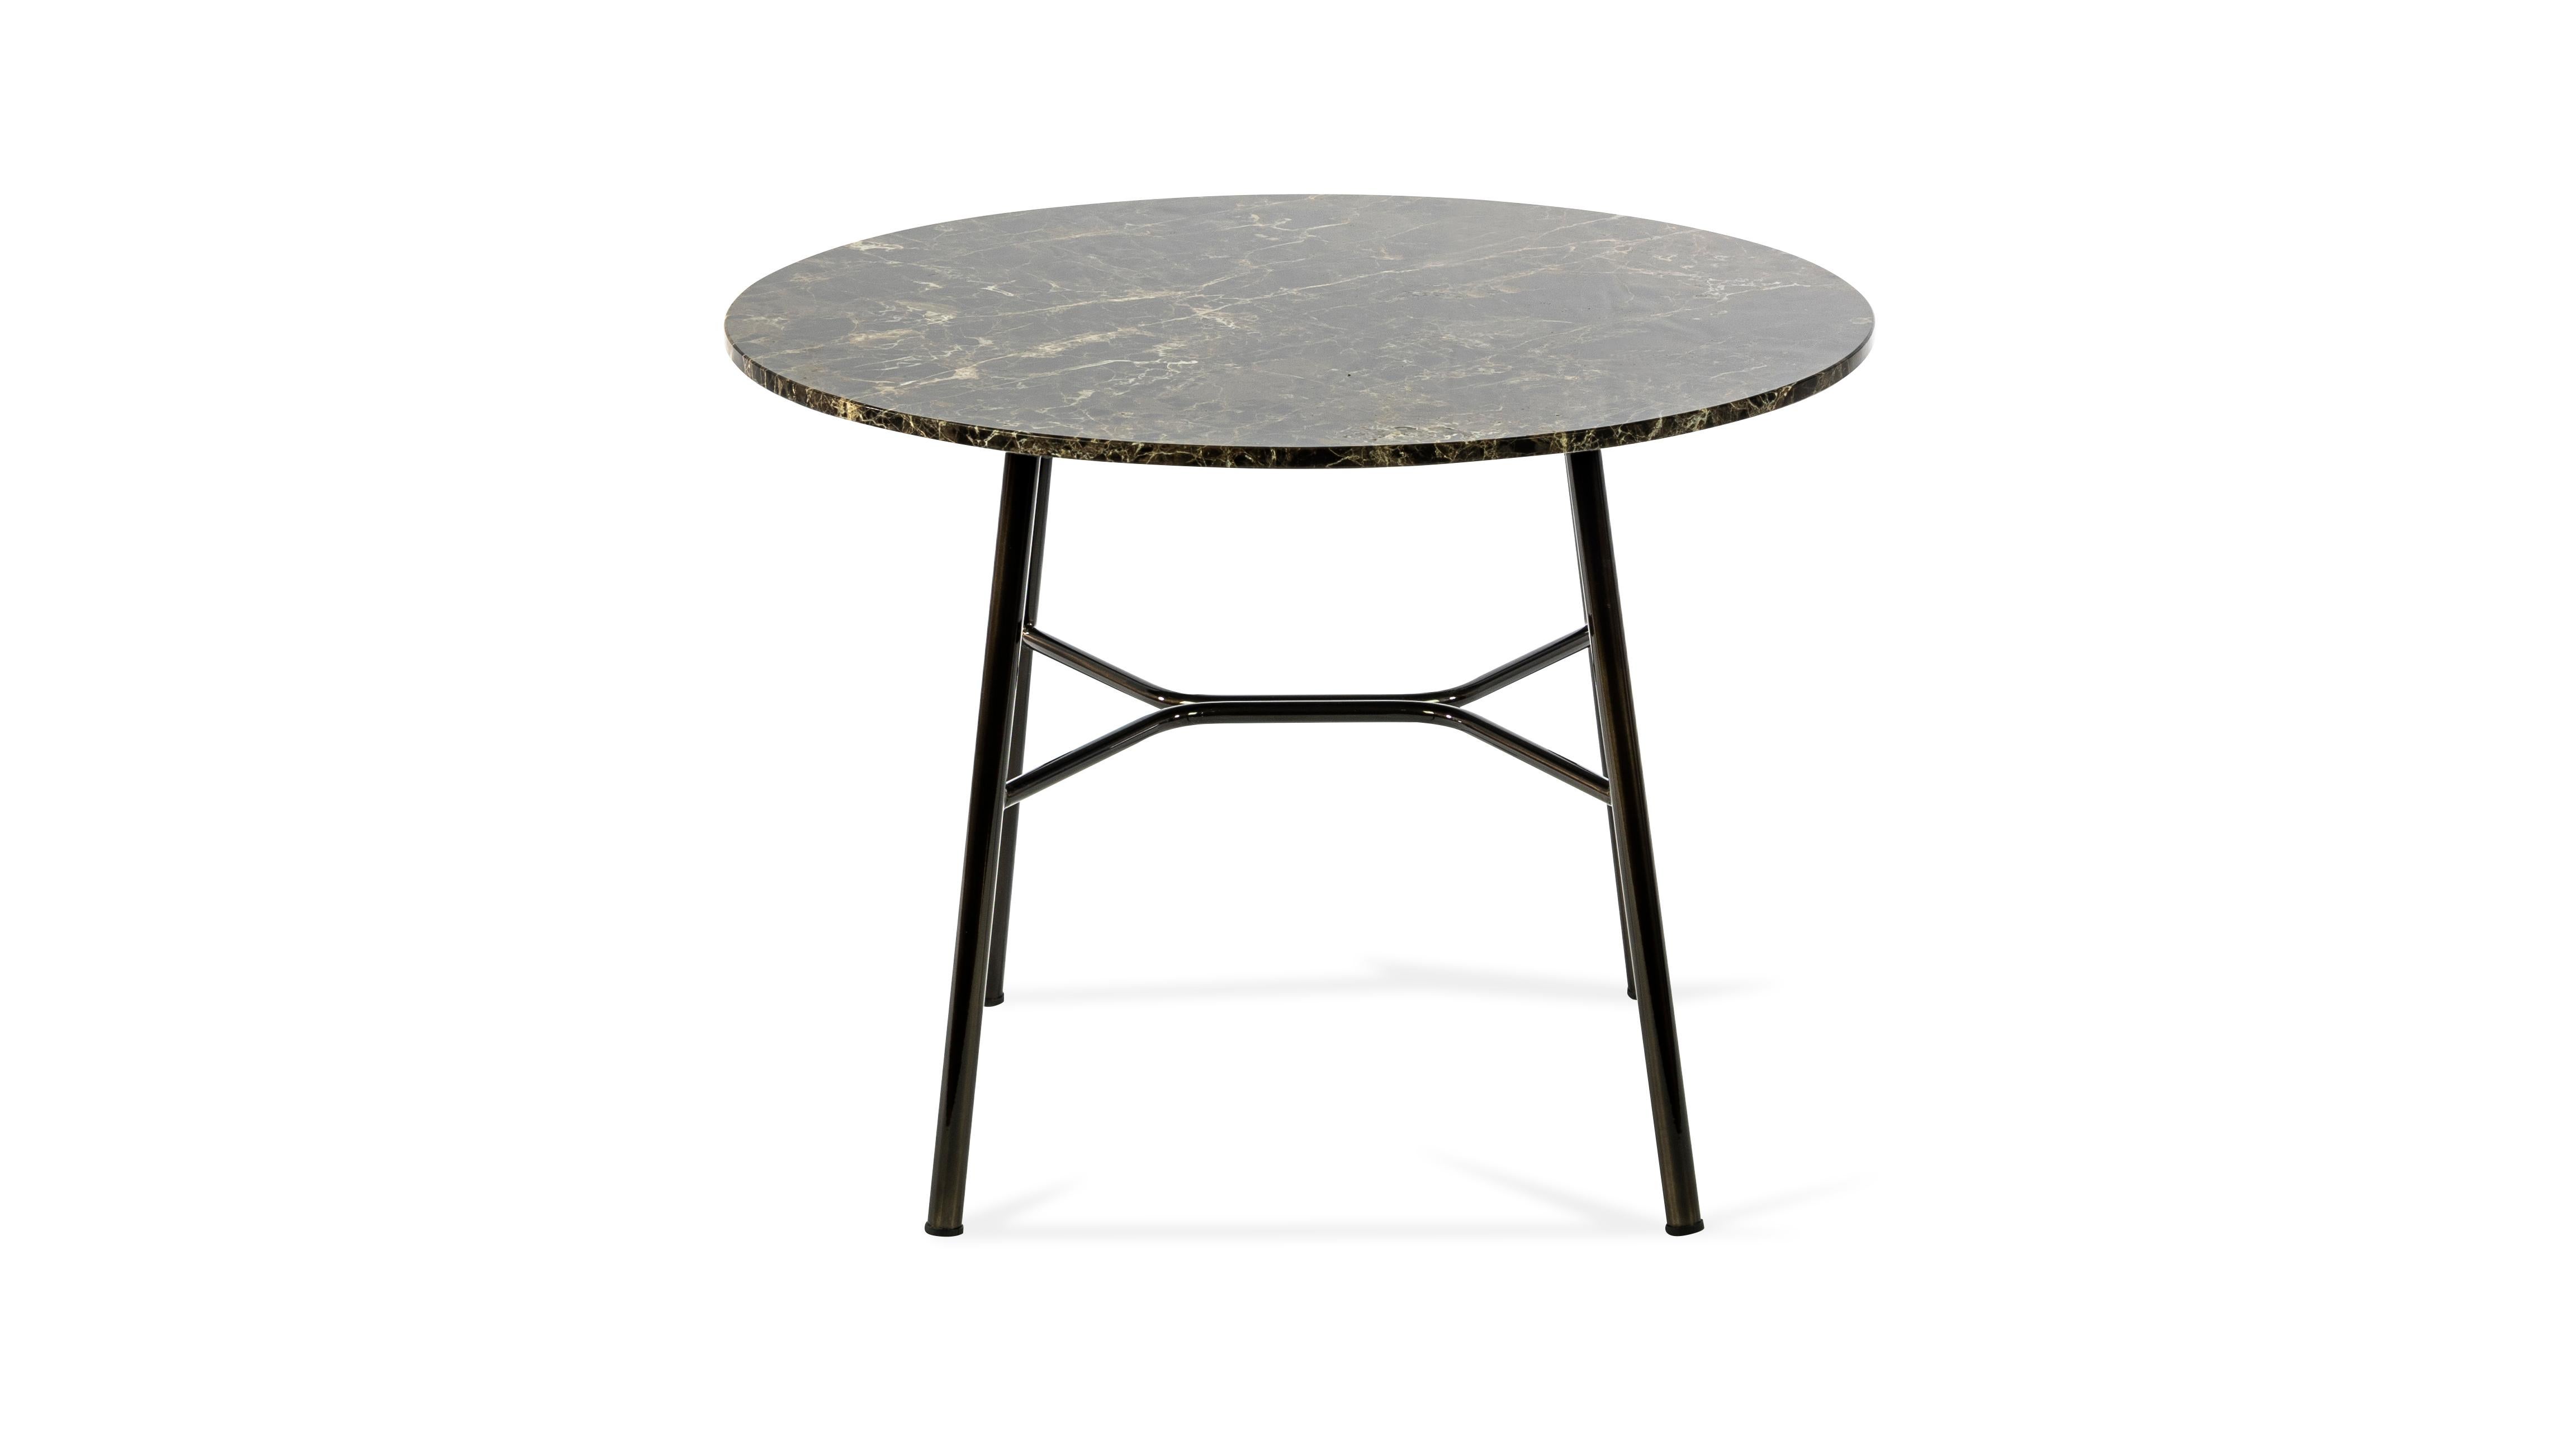 Coffee table, with metal frame, painted in standard or special colors, top available in glass ceramic color brown Emperador marble diameter 50 cm, height 45
It fits perfectly in a hotel lounge or home environment.